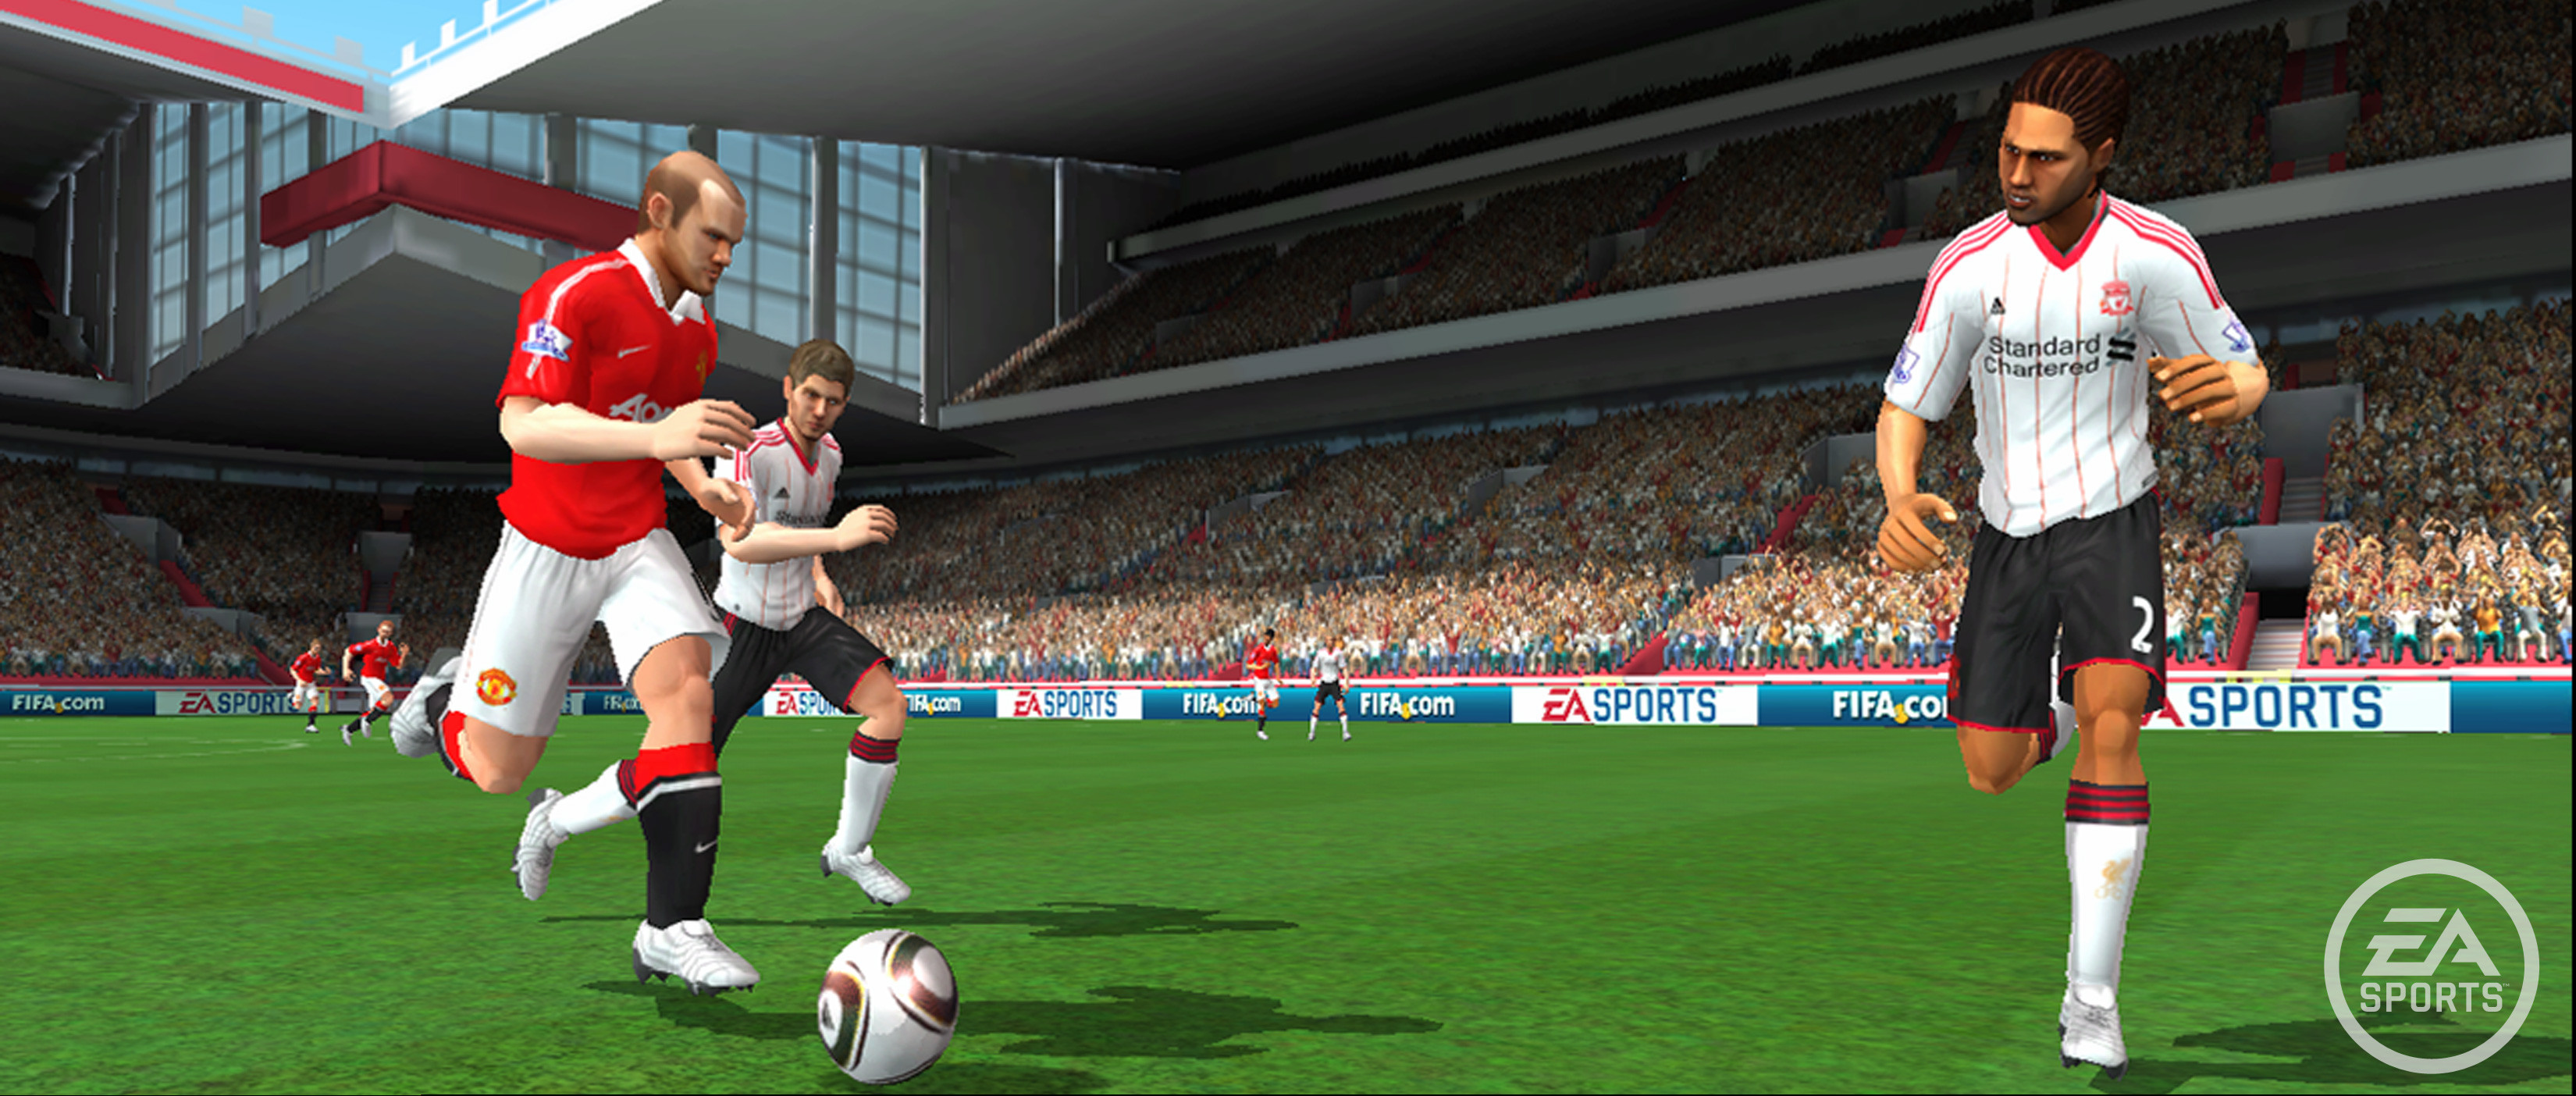 fifa soccer 11 wii download free